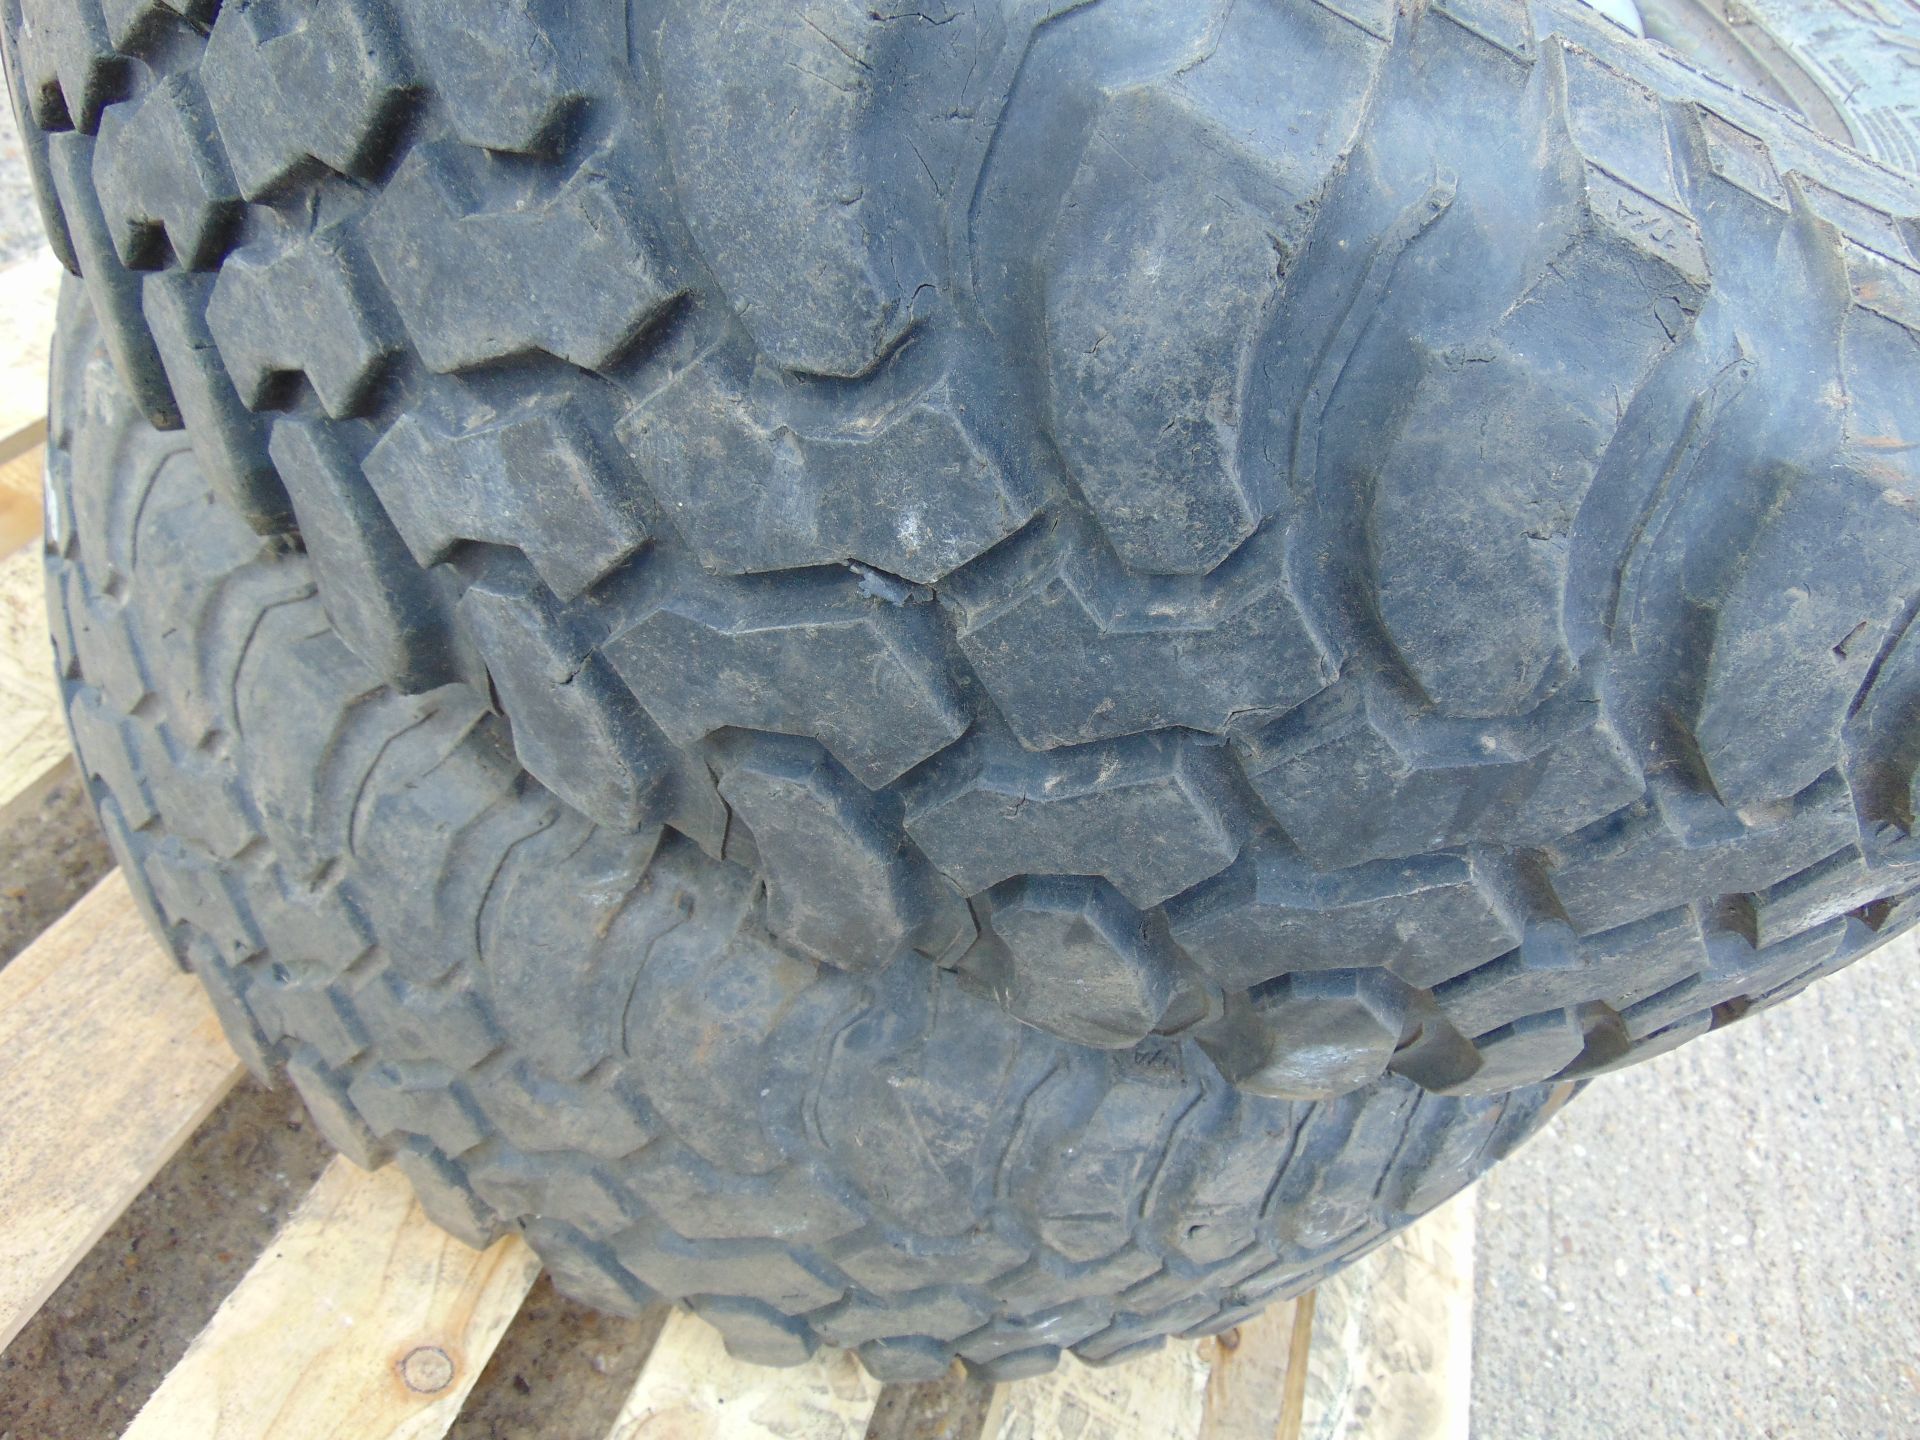 2 x BF Goodrich Mud Terrain TA LT 285/75 R16 Tyres complete with Rims - Image 7 of 7